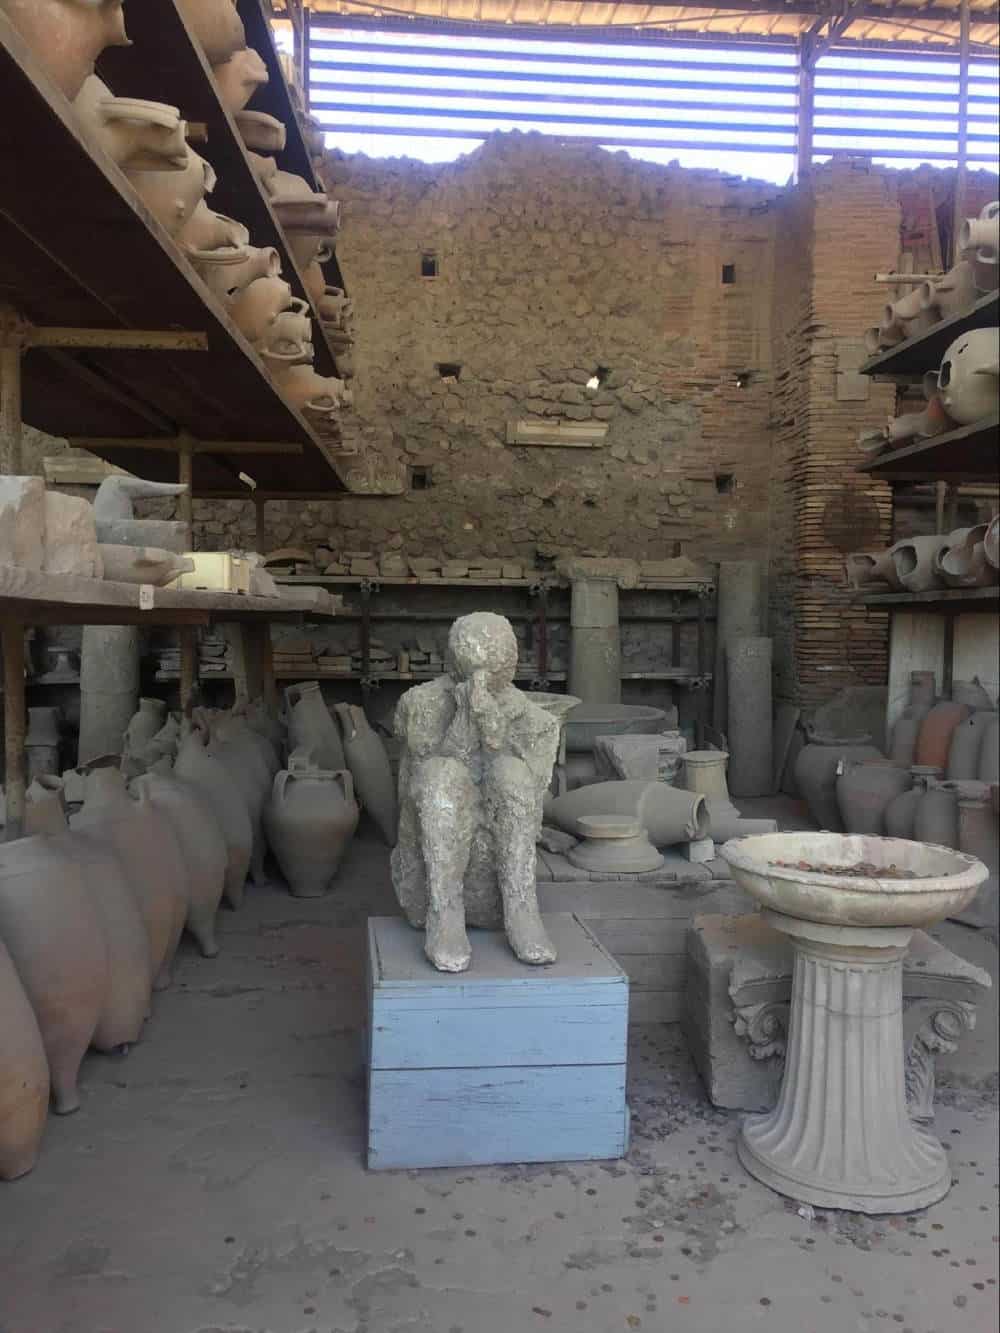 #ThrowbackTuesday to 79 A.D., Pompeii Italy